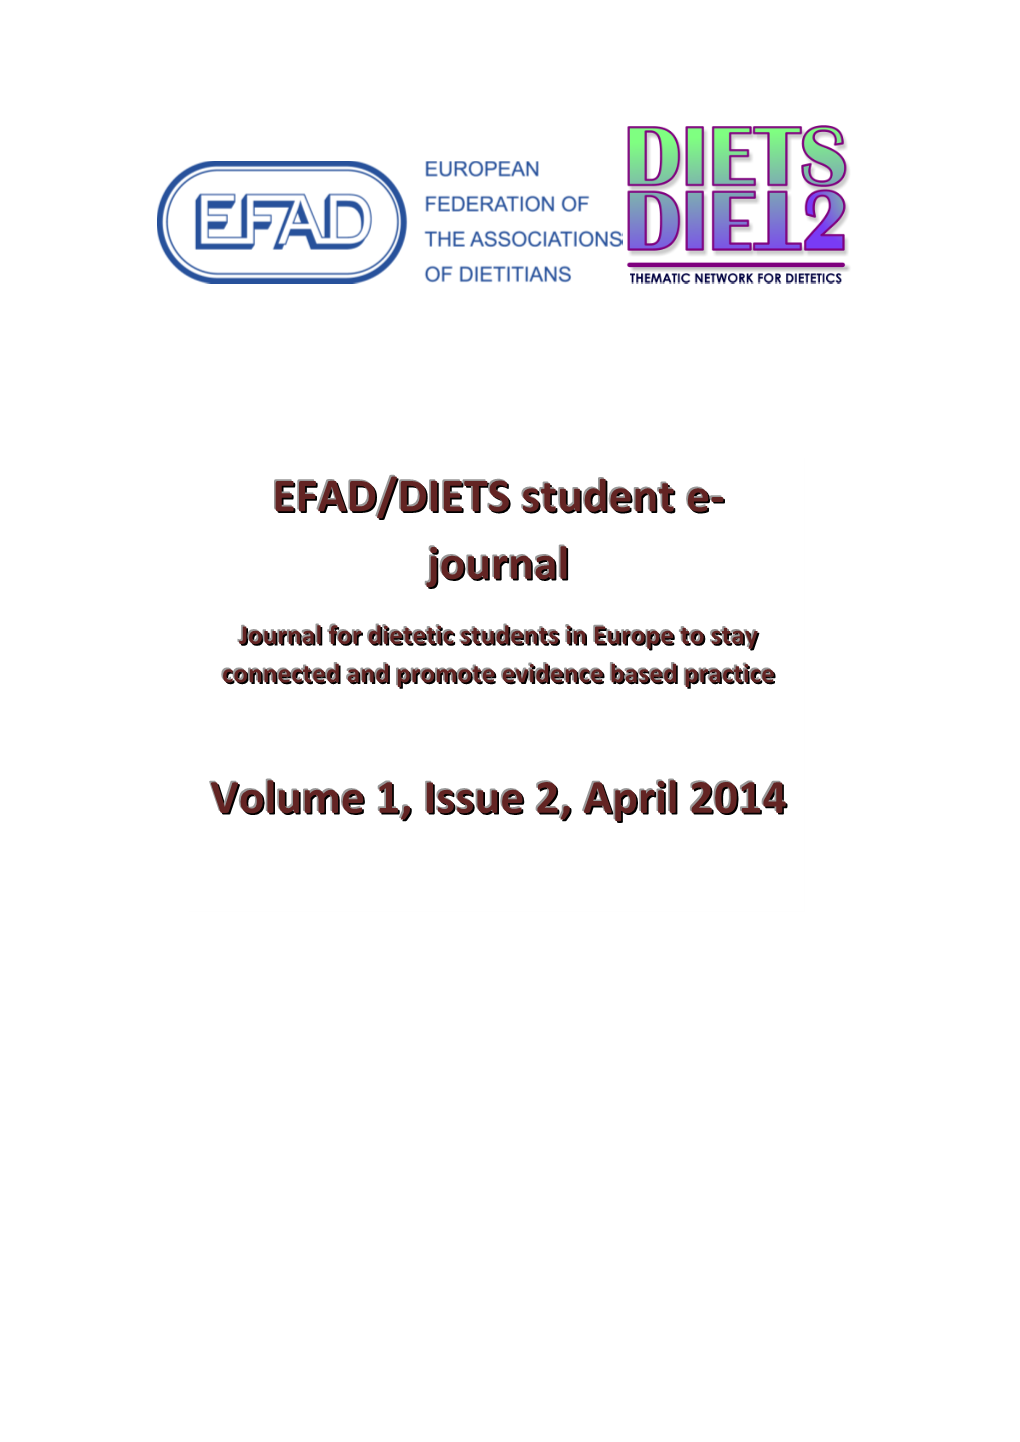 DIETS Student E-Journal Issue 2